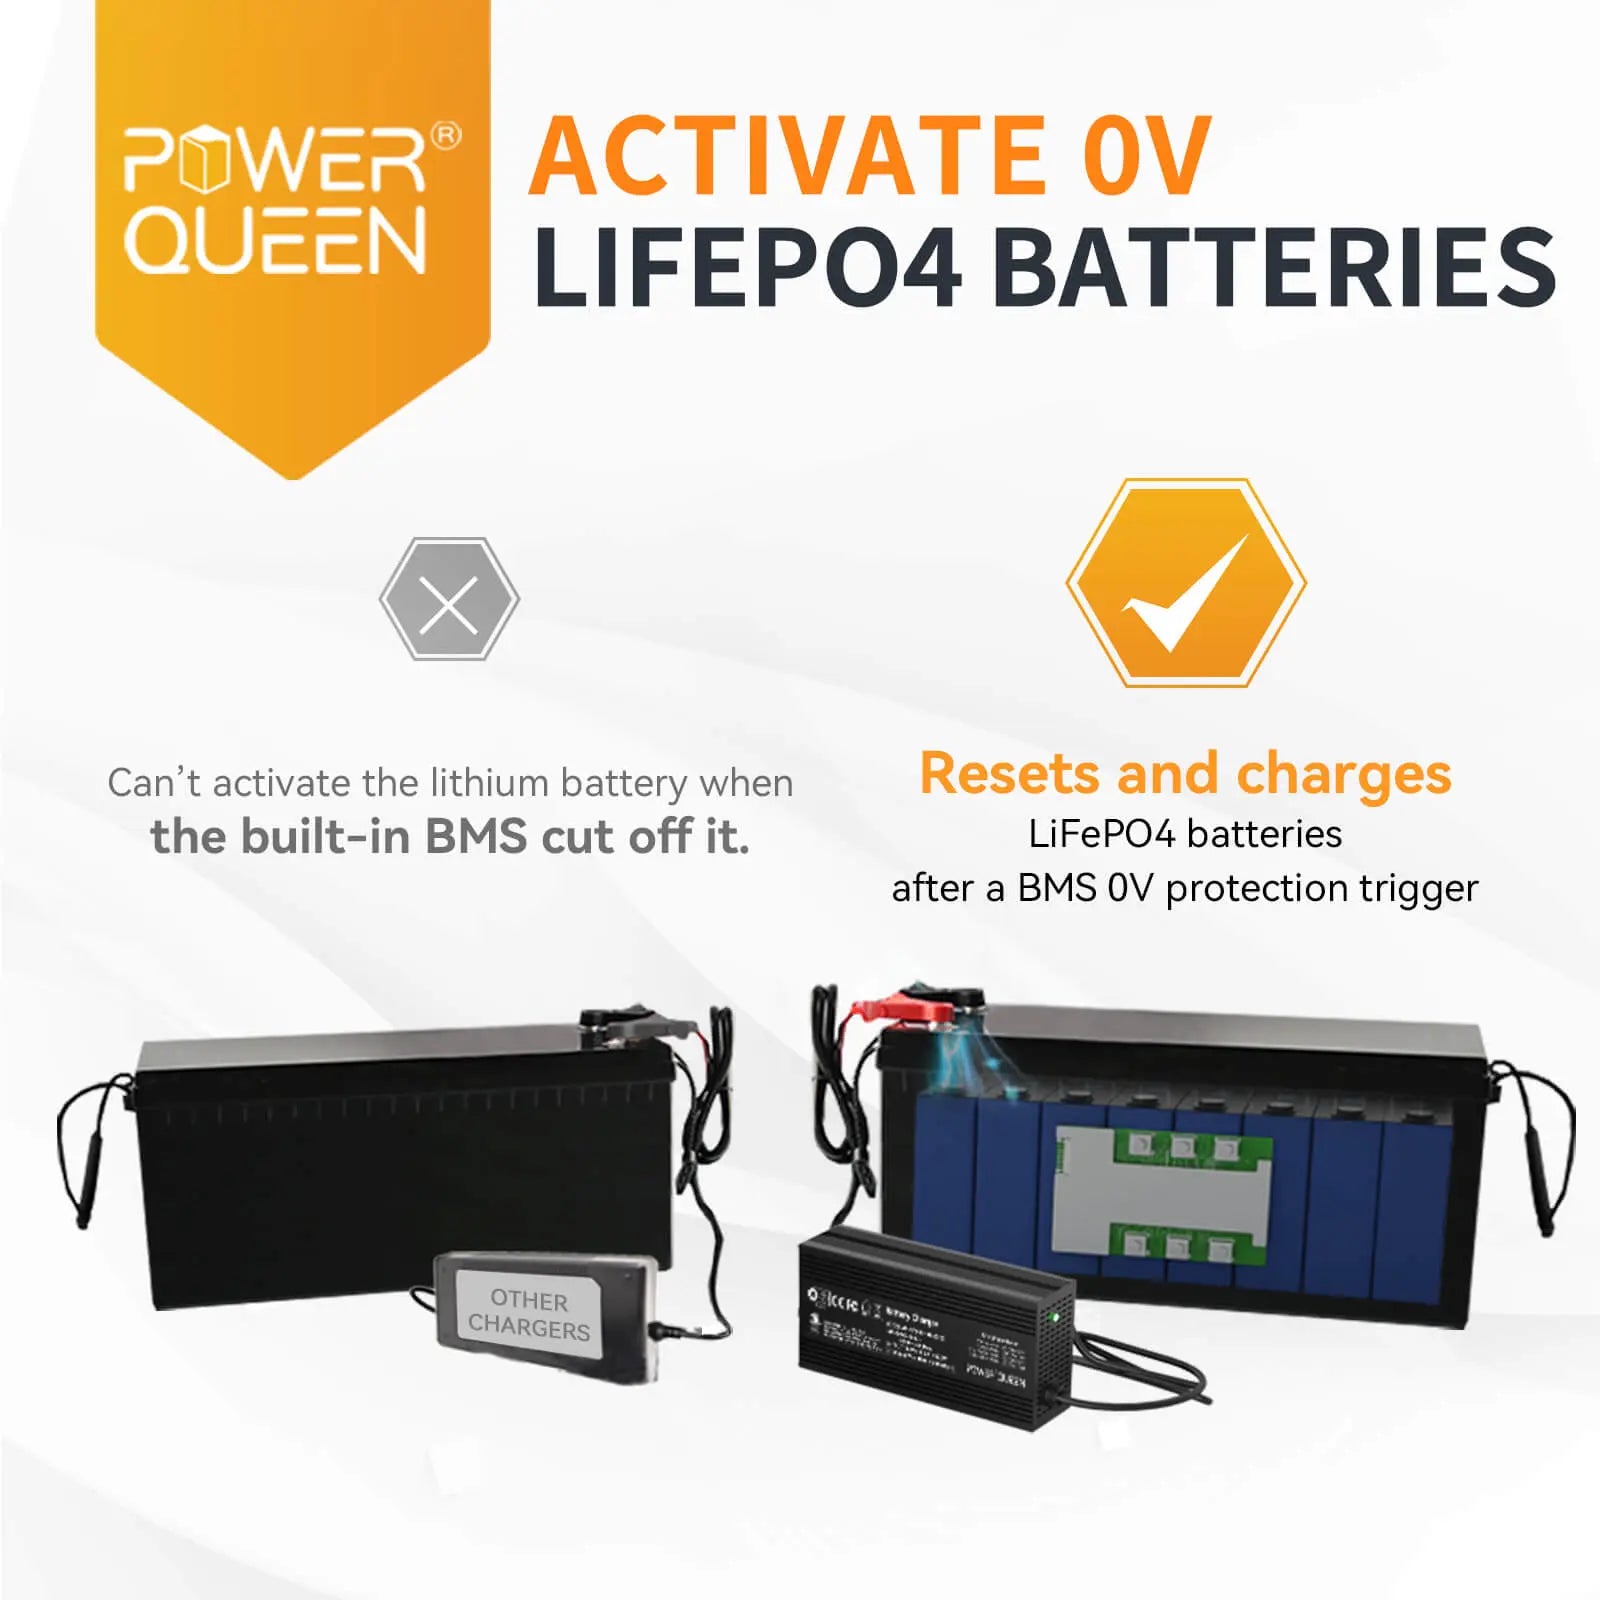 Power Queen 14.6V 20A LiFePO4 Battery Charger Power Queen